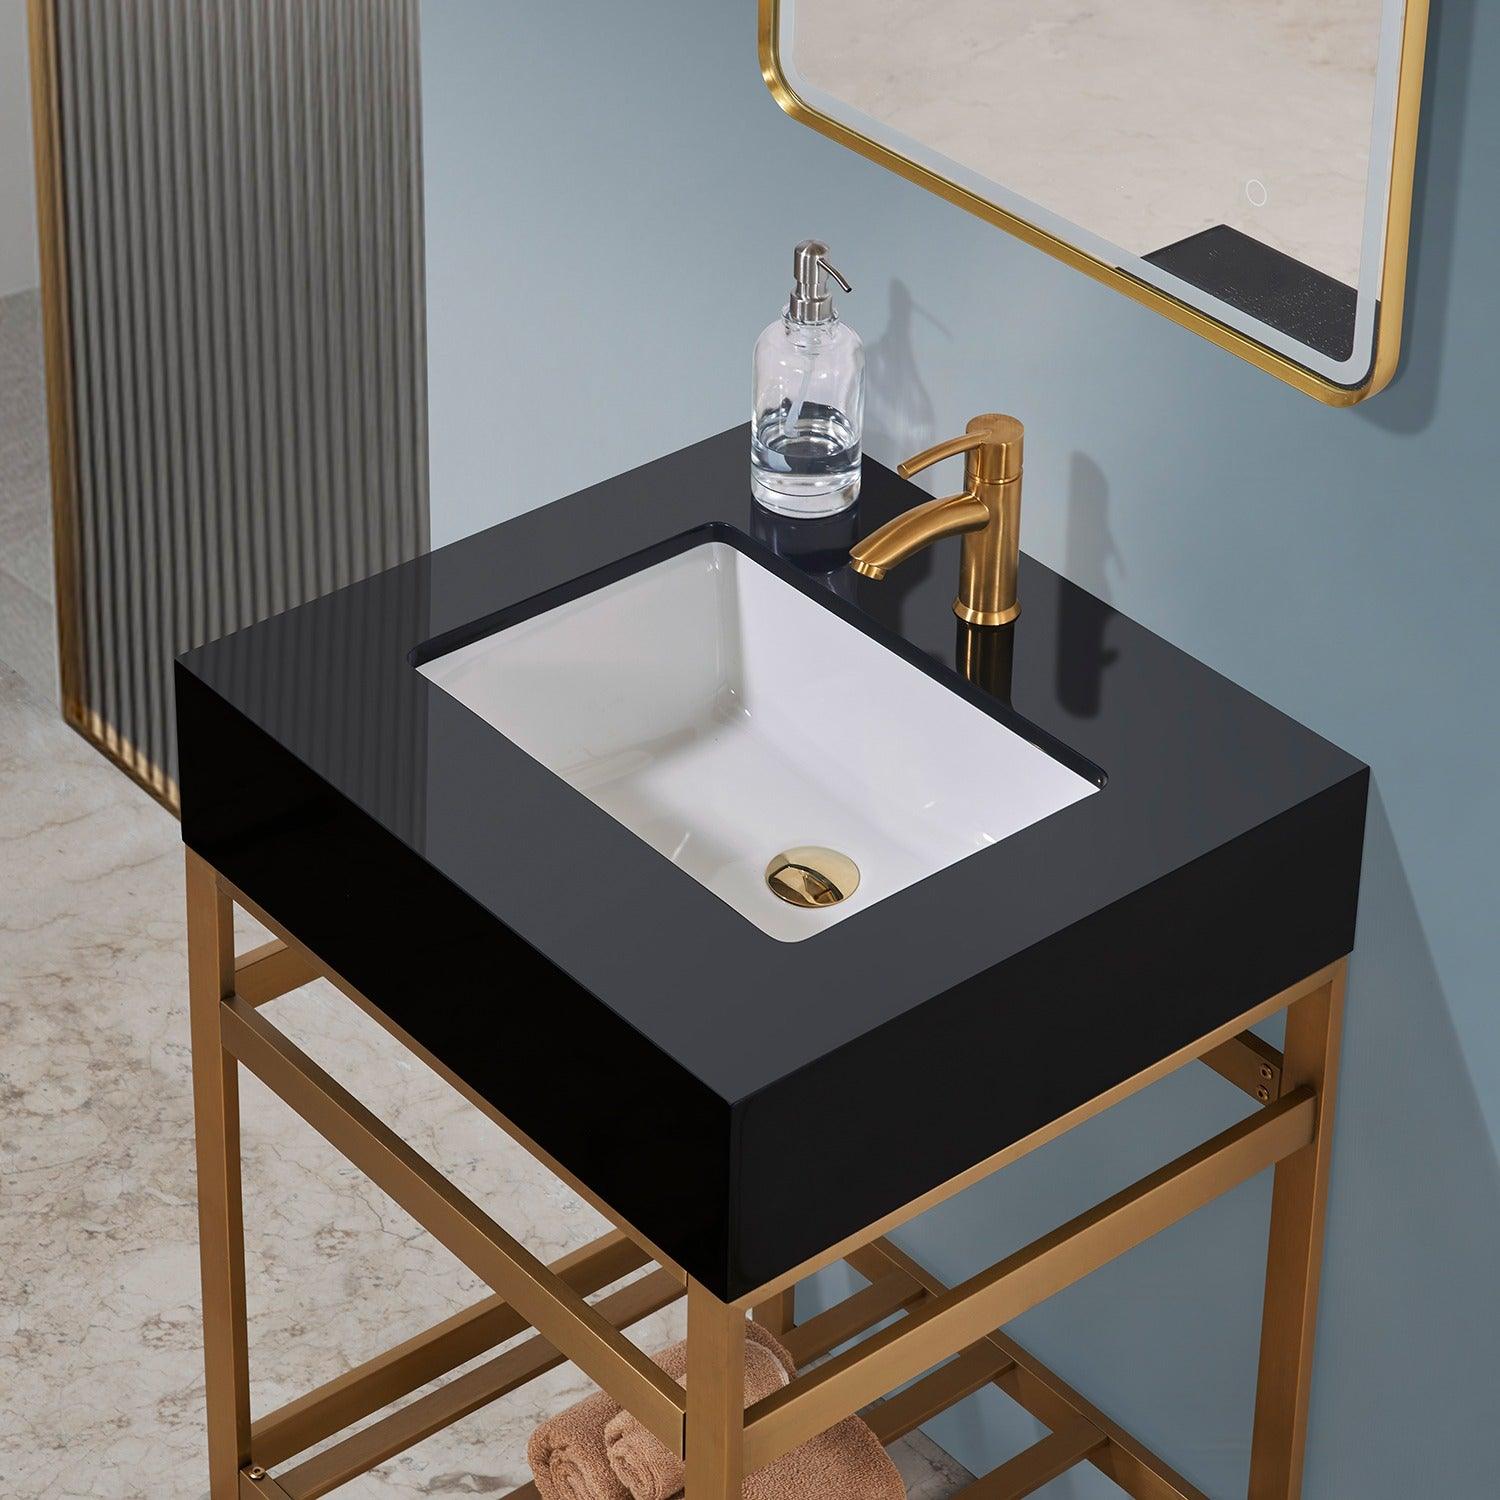 Altair Nauders Single Stainless Steel Vanity Console in Brushed Gold with Imperial Black Stone Countertop and Optional Mirror - Sea & Stone Bath